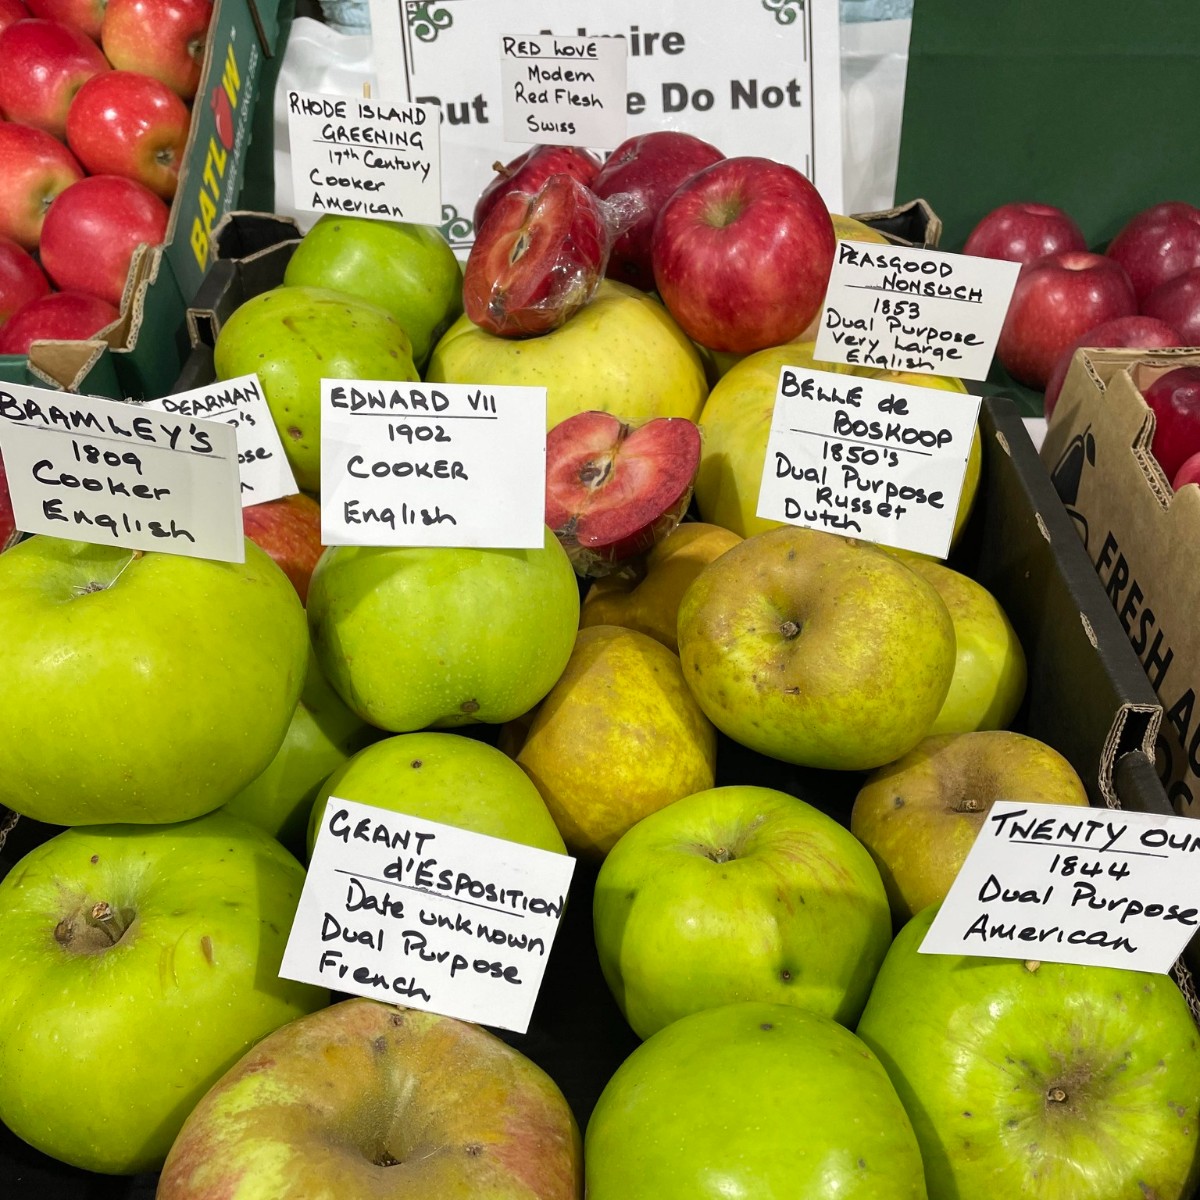 Thanks to Batlow Show (100 years young) for inviting DPI Development Officer Kevin Dodds along to judge the fruit section. Some interesting heritage apple displays & for a bit of fun, a Biggest Apple section (by weight for a group of 3) - the winning entry was just over 1.5kg!